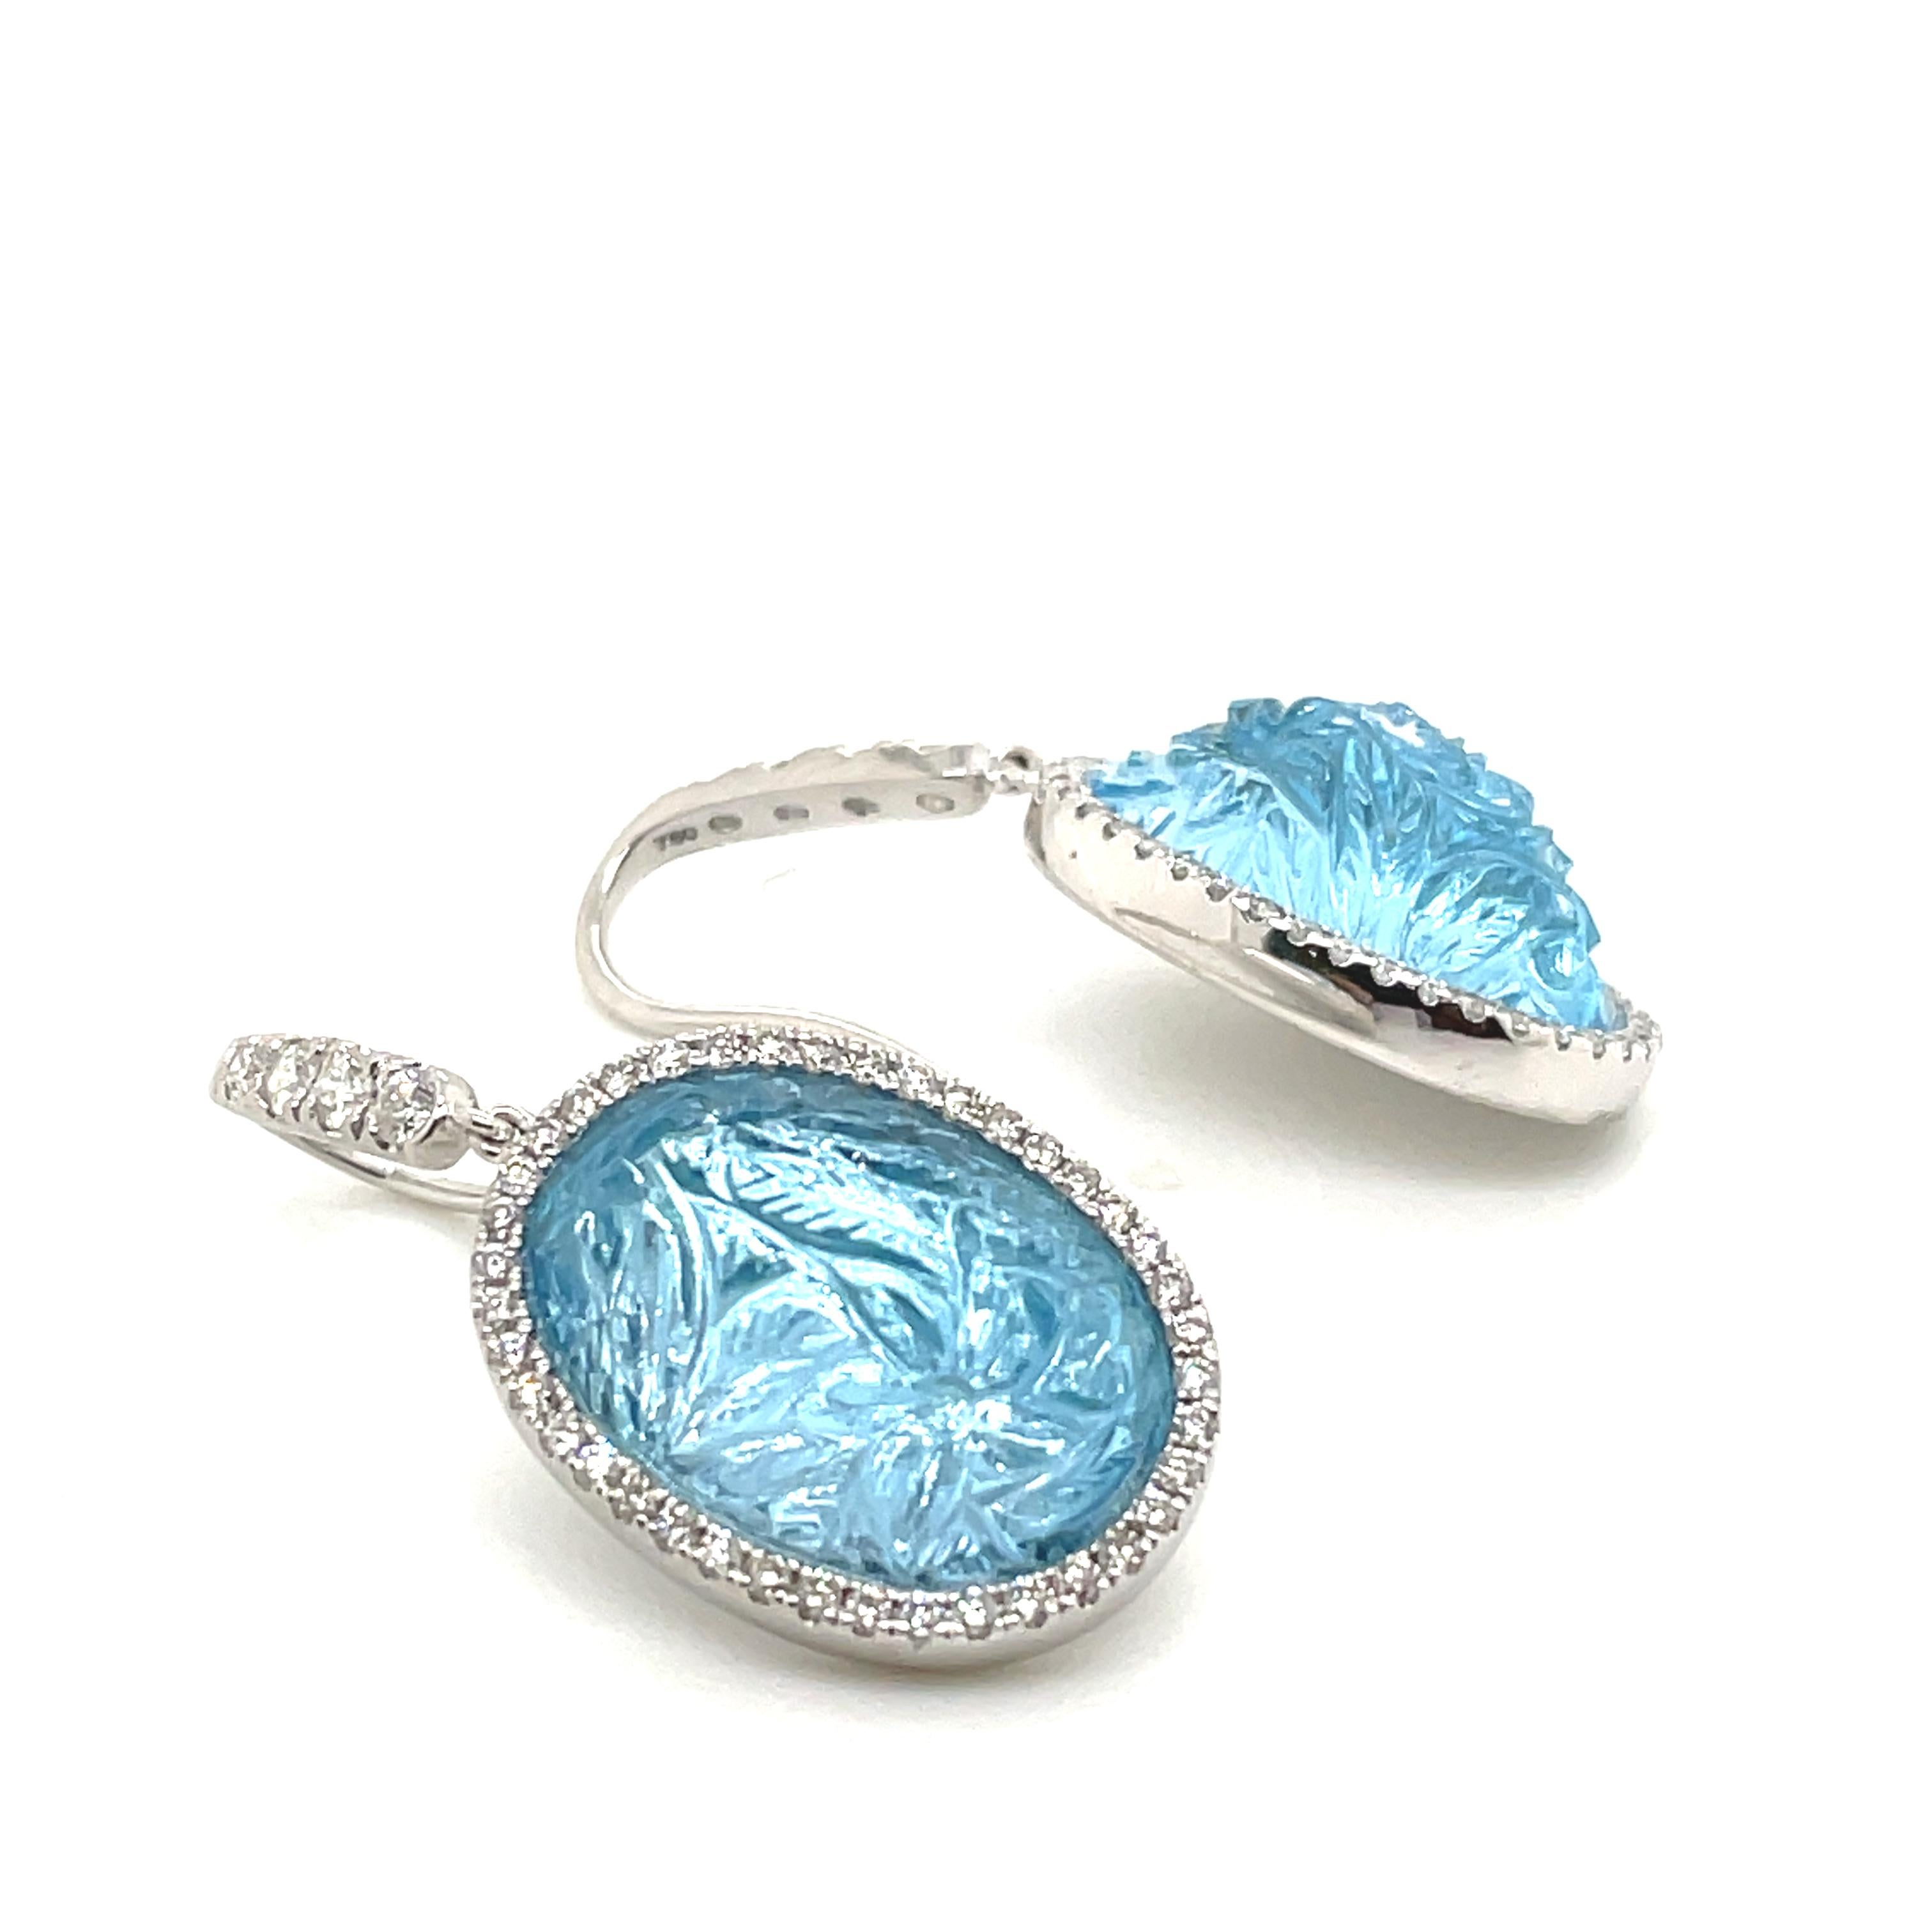 Oval Cut Carved Blue Topaz Cts 27.41 and Diamond Earrings Set in 18k White Gold For Sale